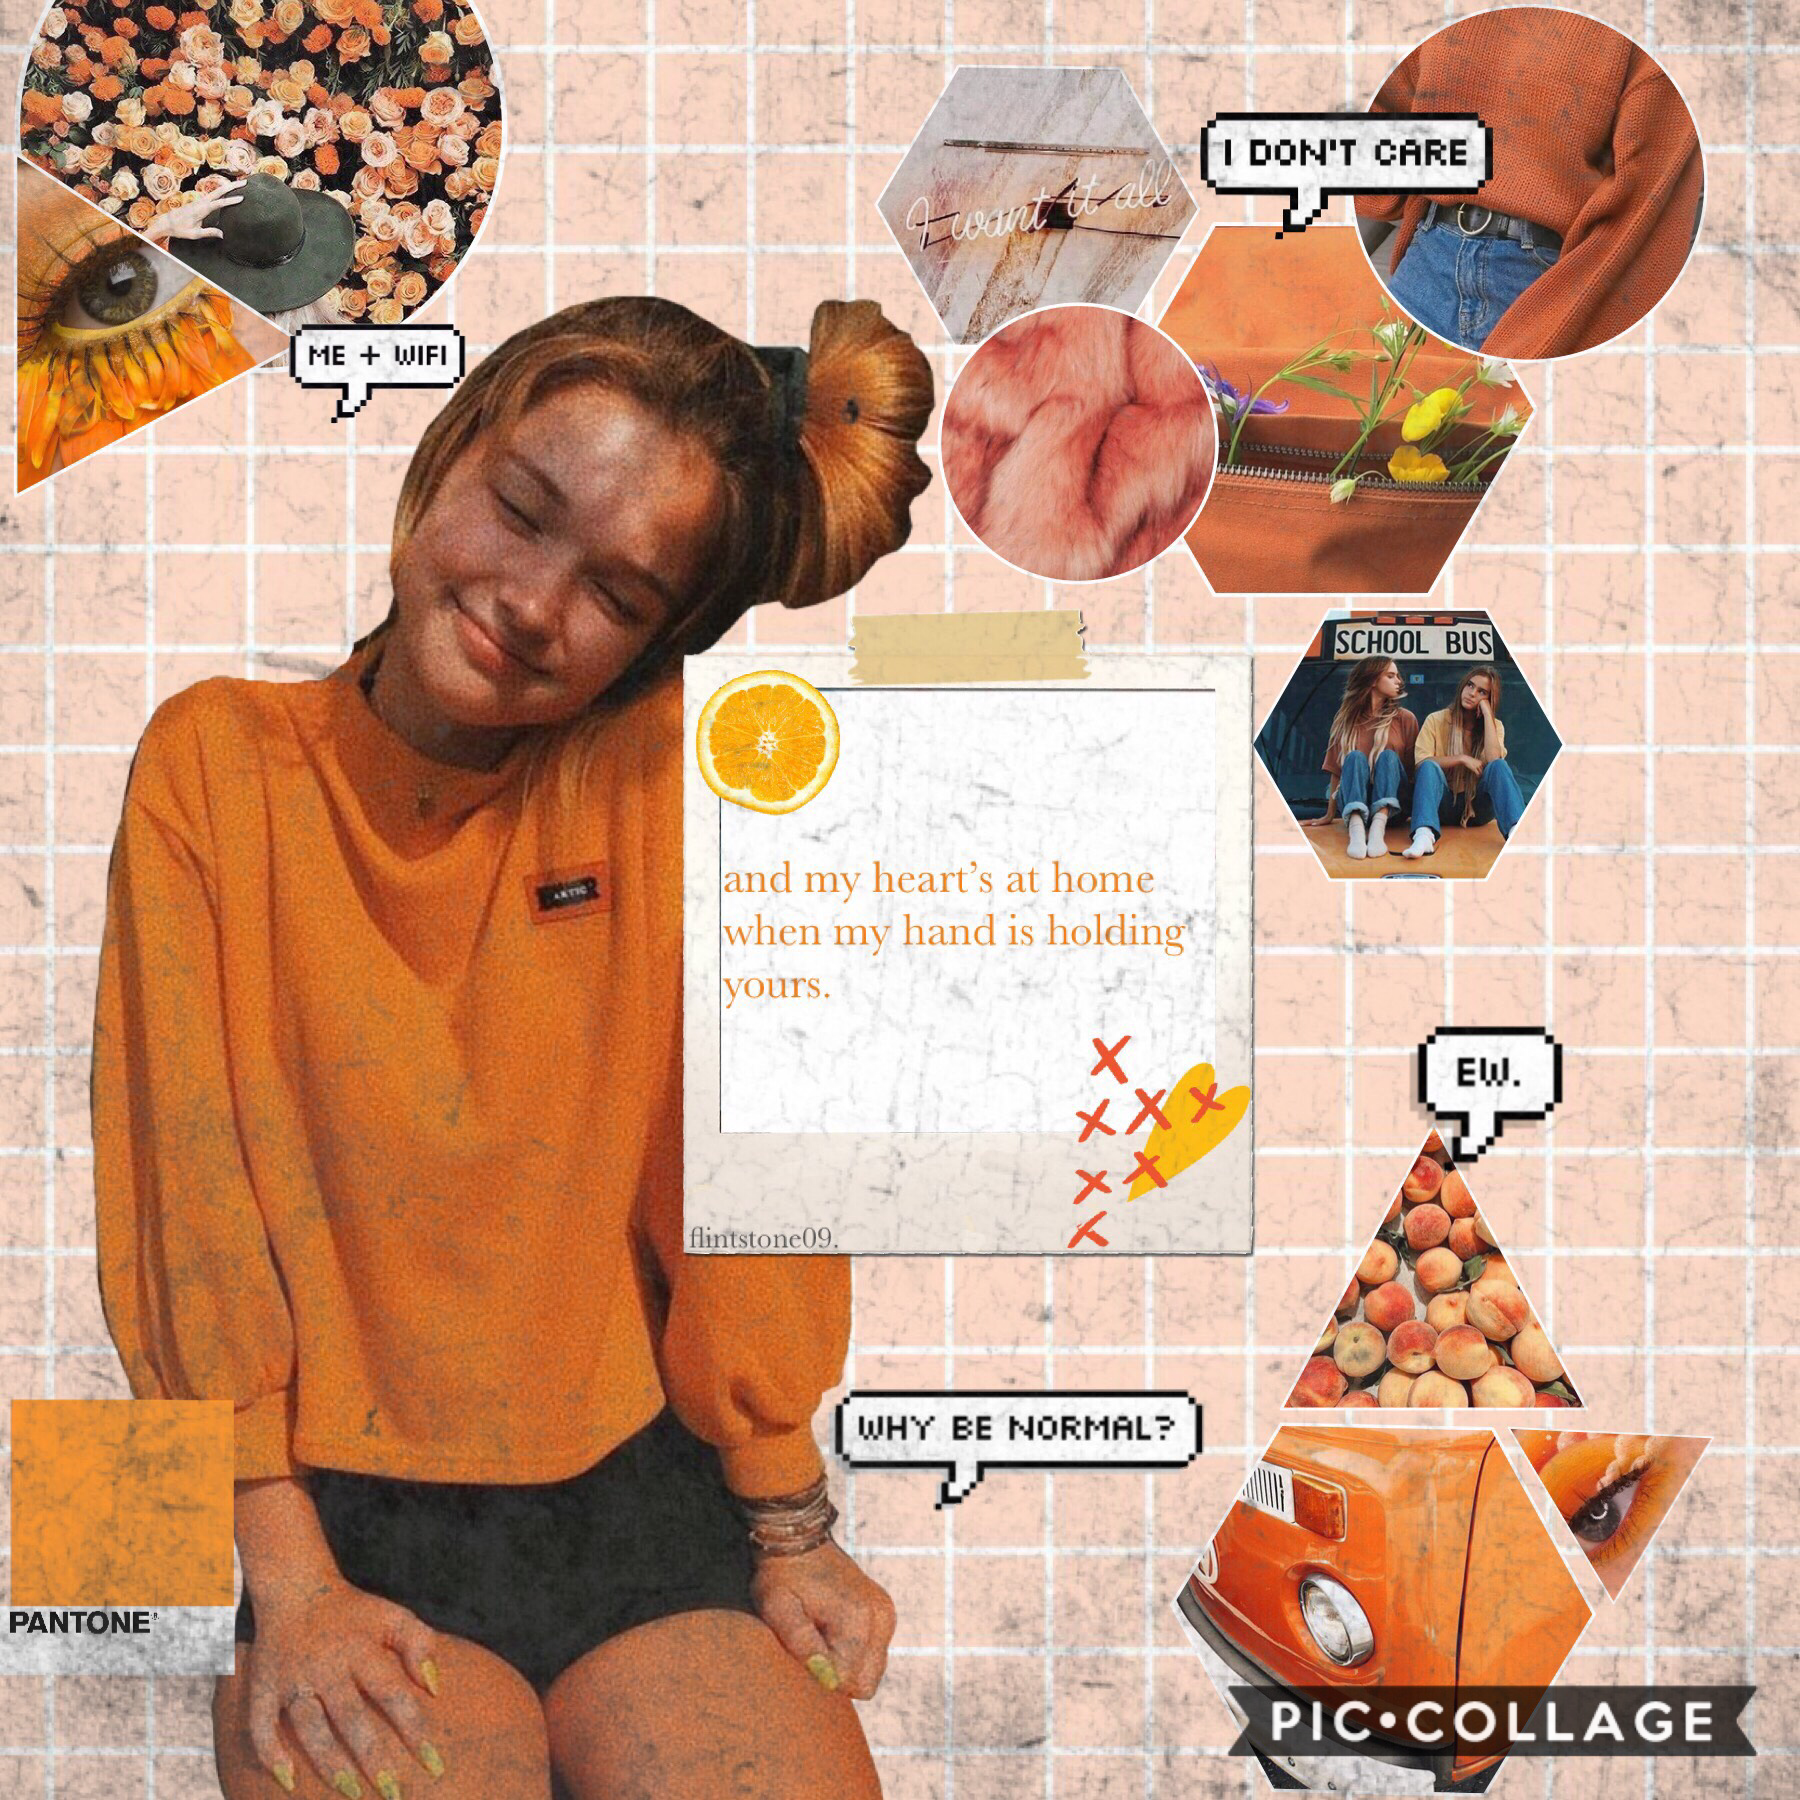 5th post of theme. 🍊TAP🍊

My FAV AHHH😁so aesthetic😊
ORANGE

QOTD: Braids or topknots? (or buns or whatever<)
AOTD: Braids, cuz I kinda suck when it comes to updos😅💩